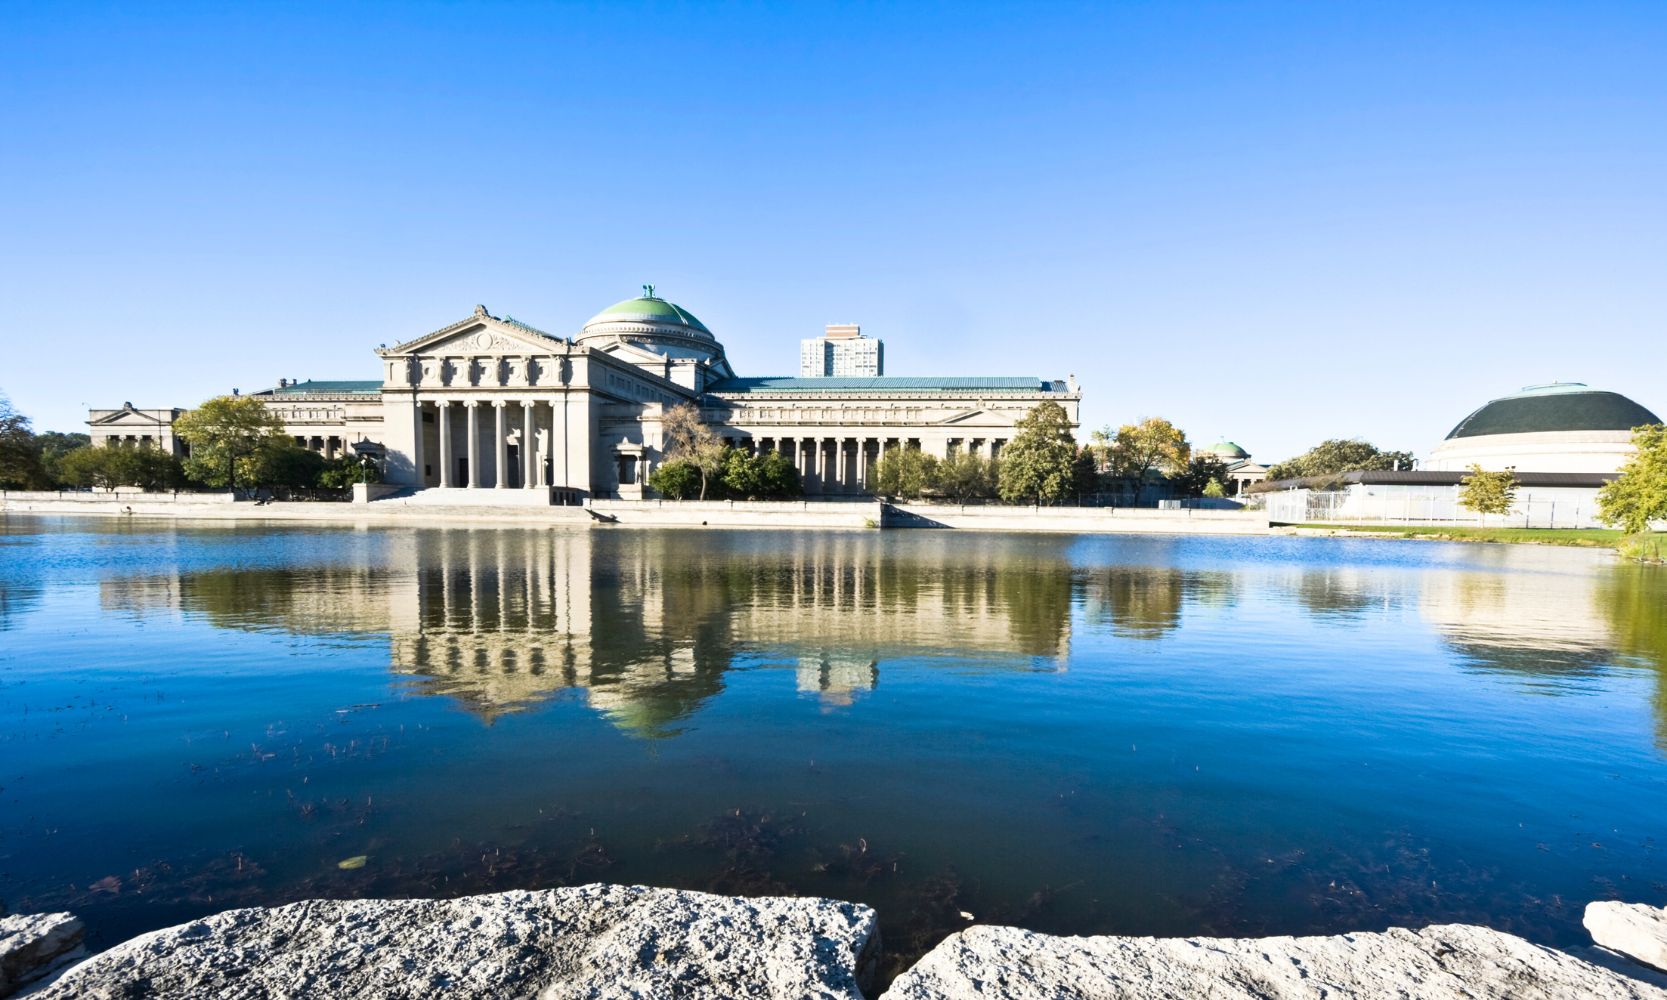 Image of the Museum of Science and Industry in Chicago behind a large pond